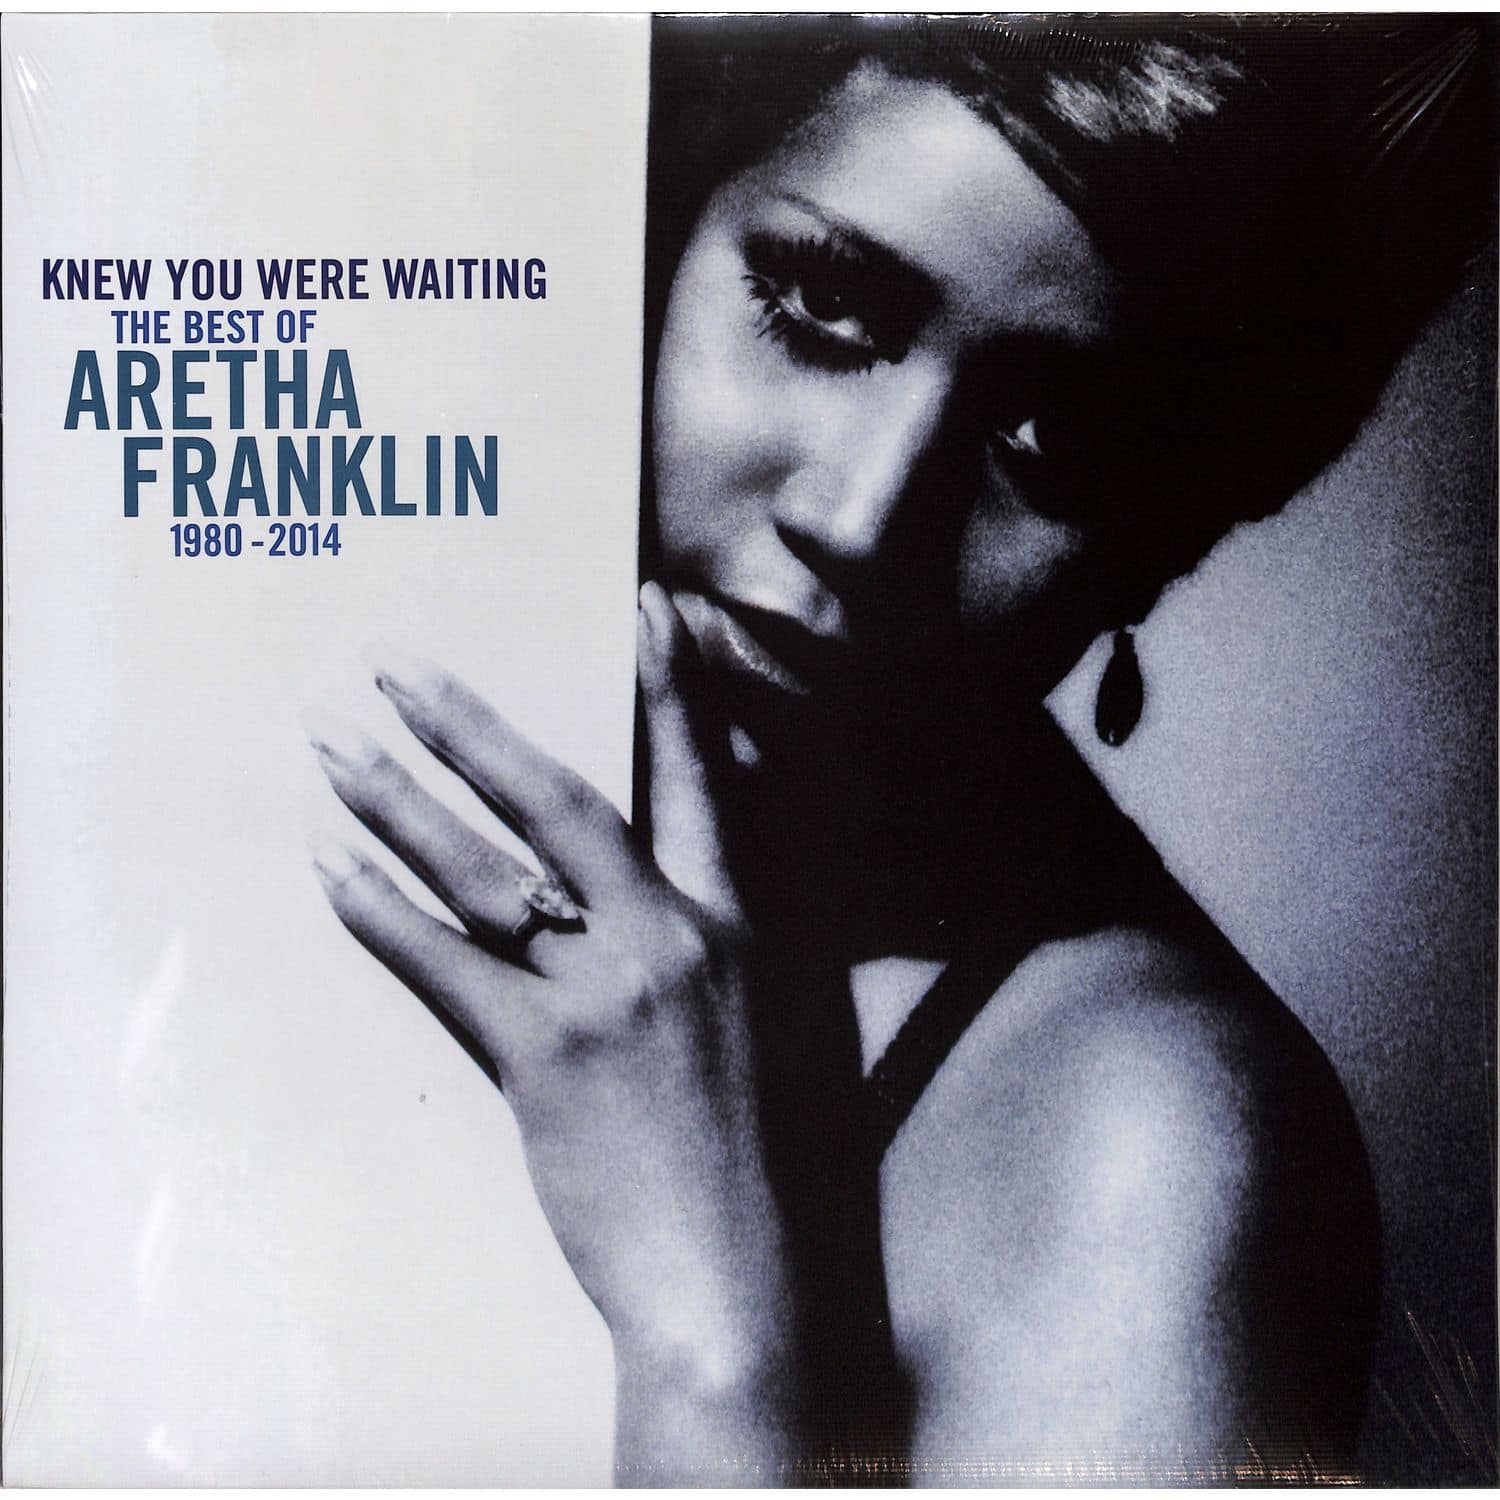 Aretha Franklin - KNEW YOU WERE WAITING: THE BEST OF ARETHA FRANKLIN 